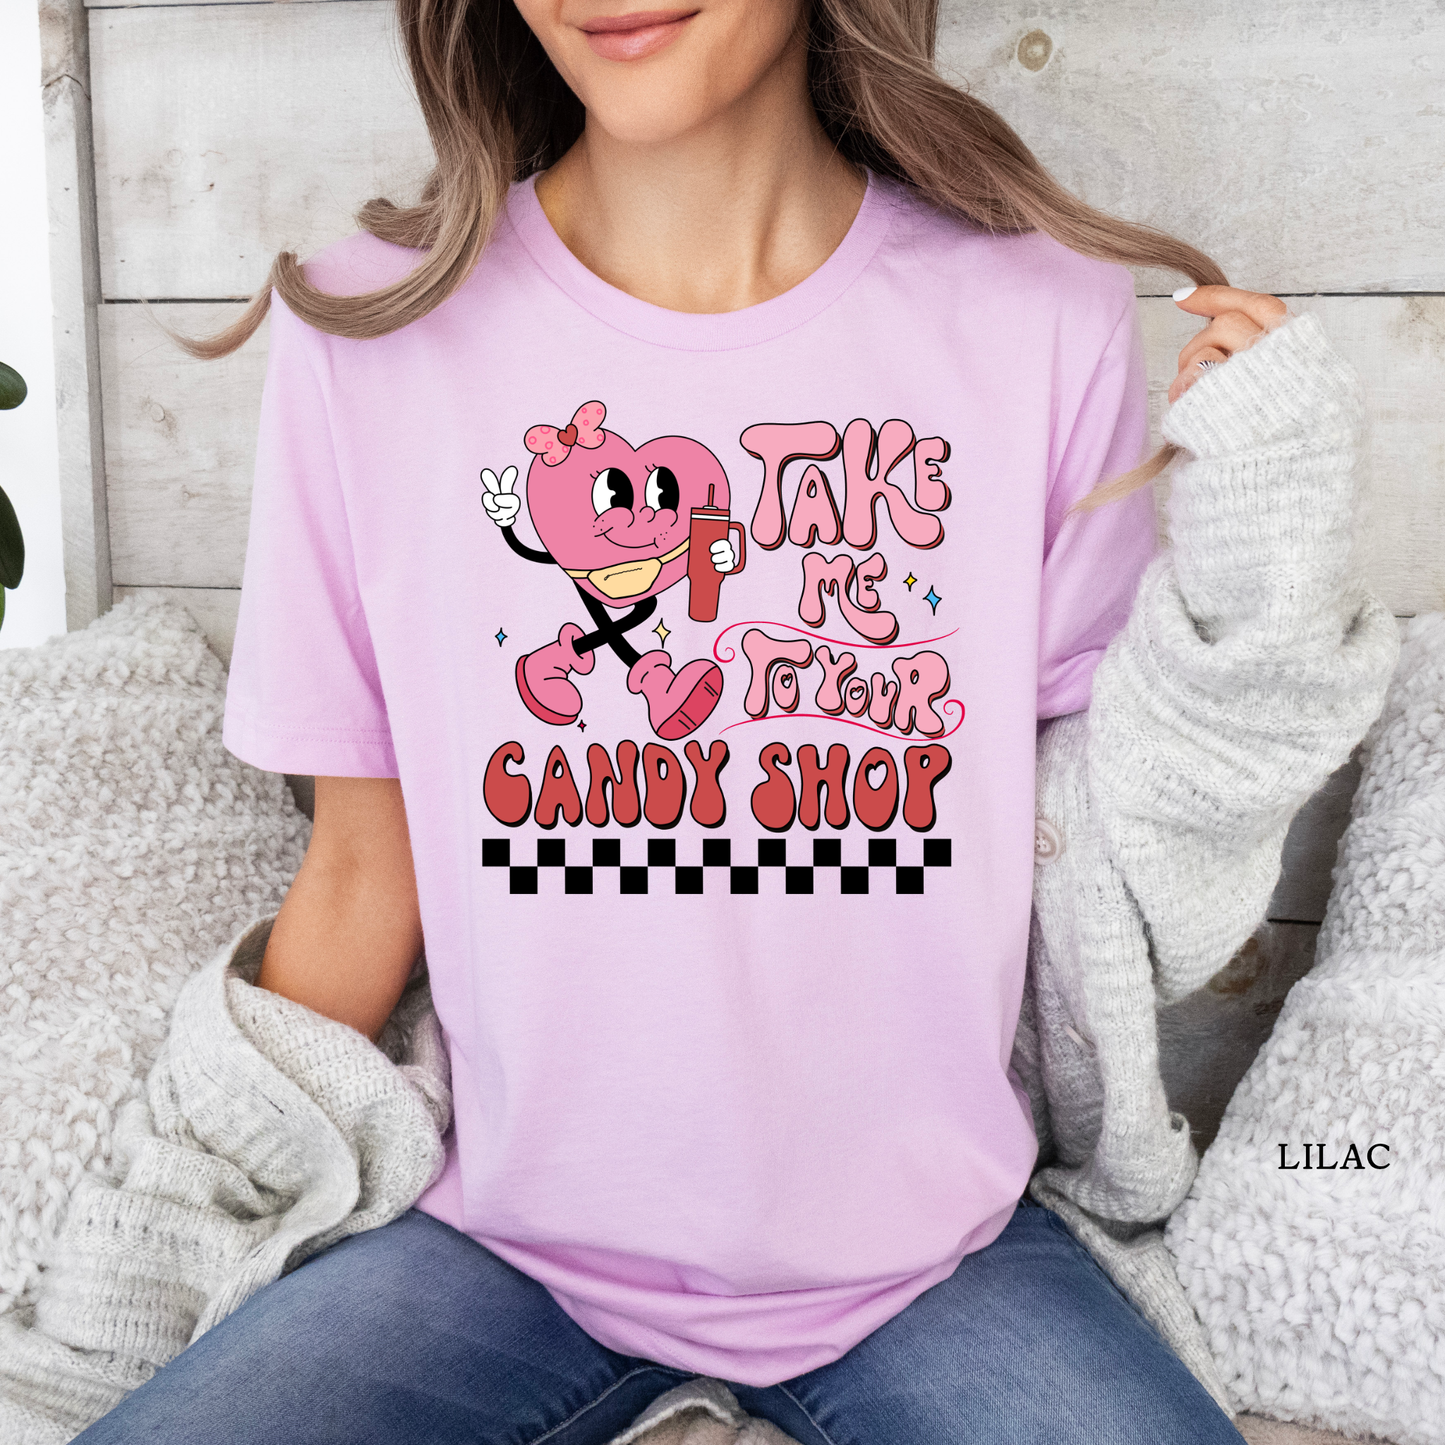 Take me to Your Candy Shop | Valentine's Day